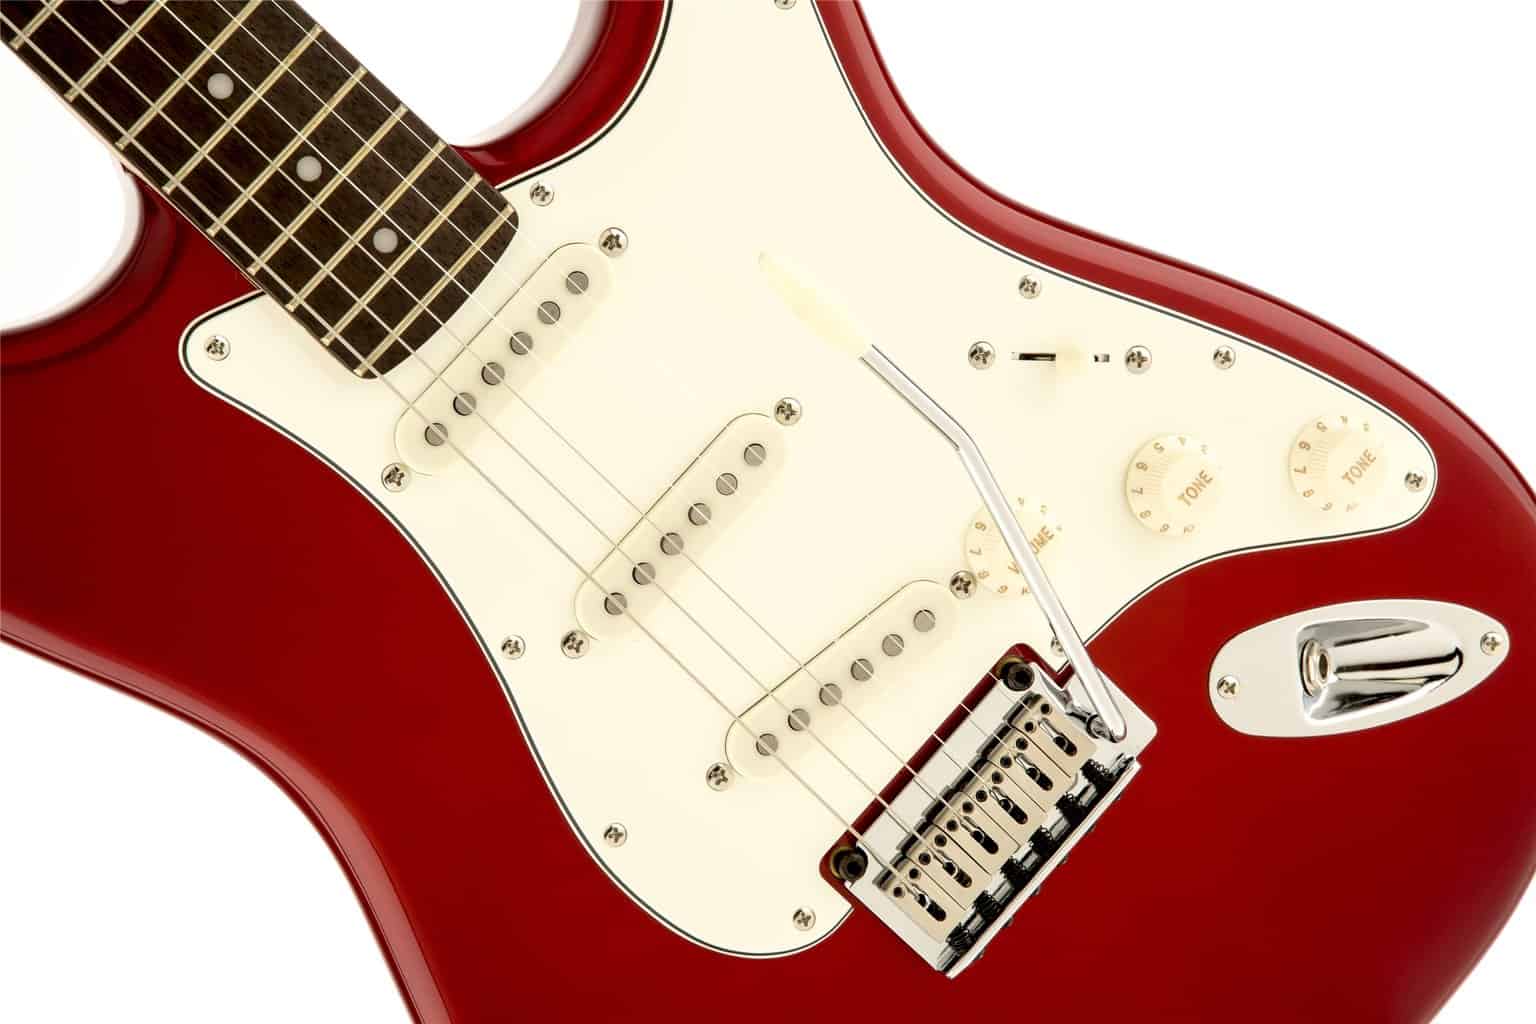 Squier lines differences